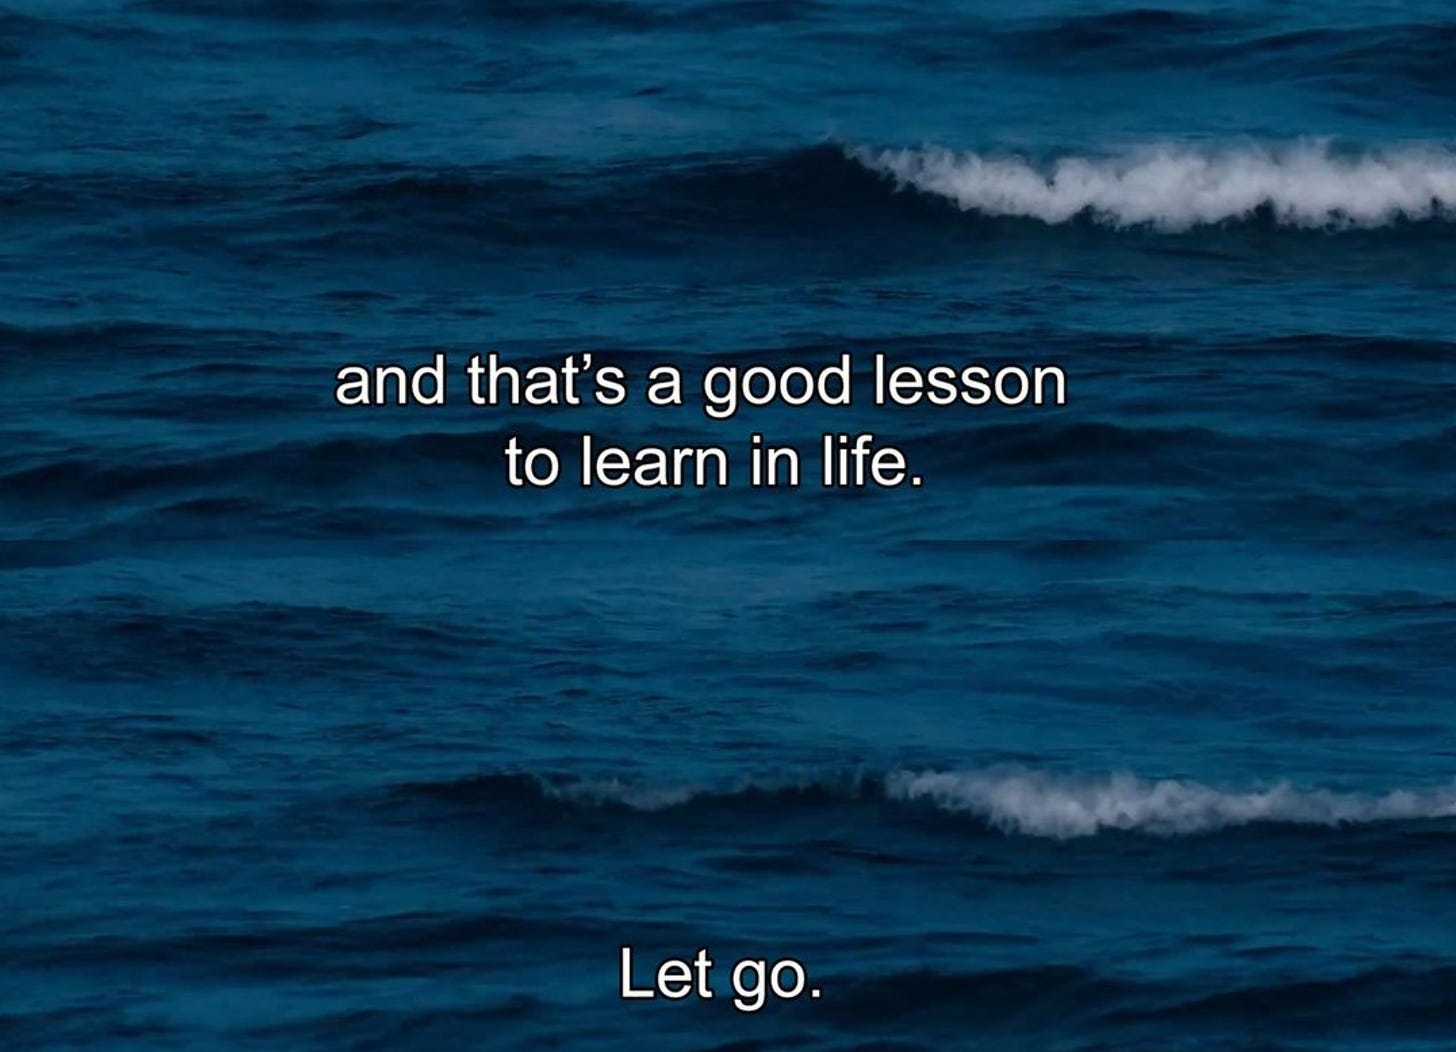 A screenshot from the film Liv and Ingmar, showing deep blue ocean waves with the subtitle “And that's a good lesson to learn in life. Let go.”